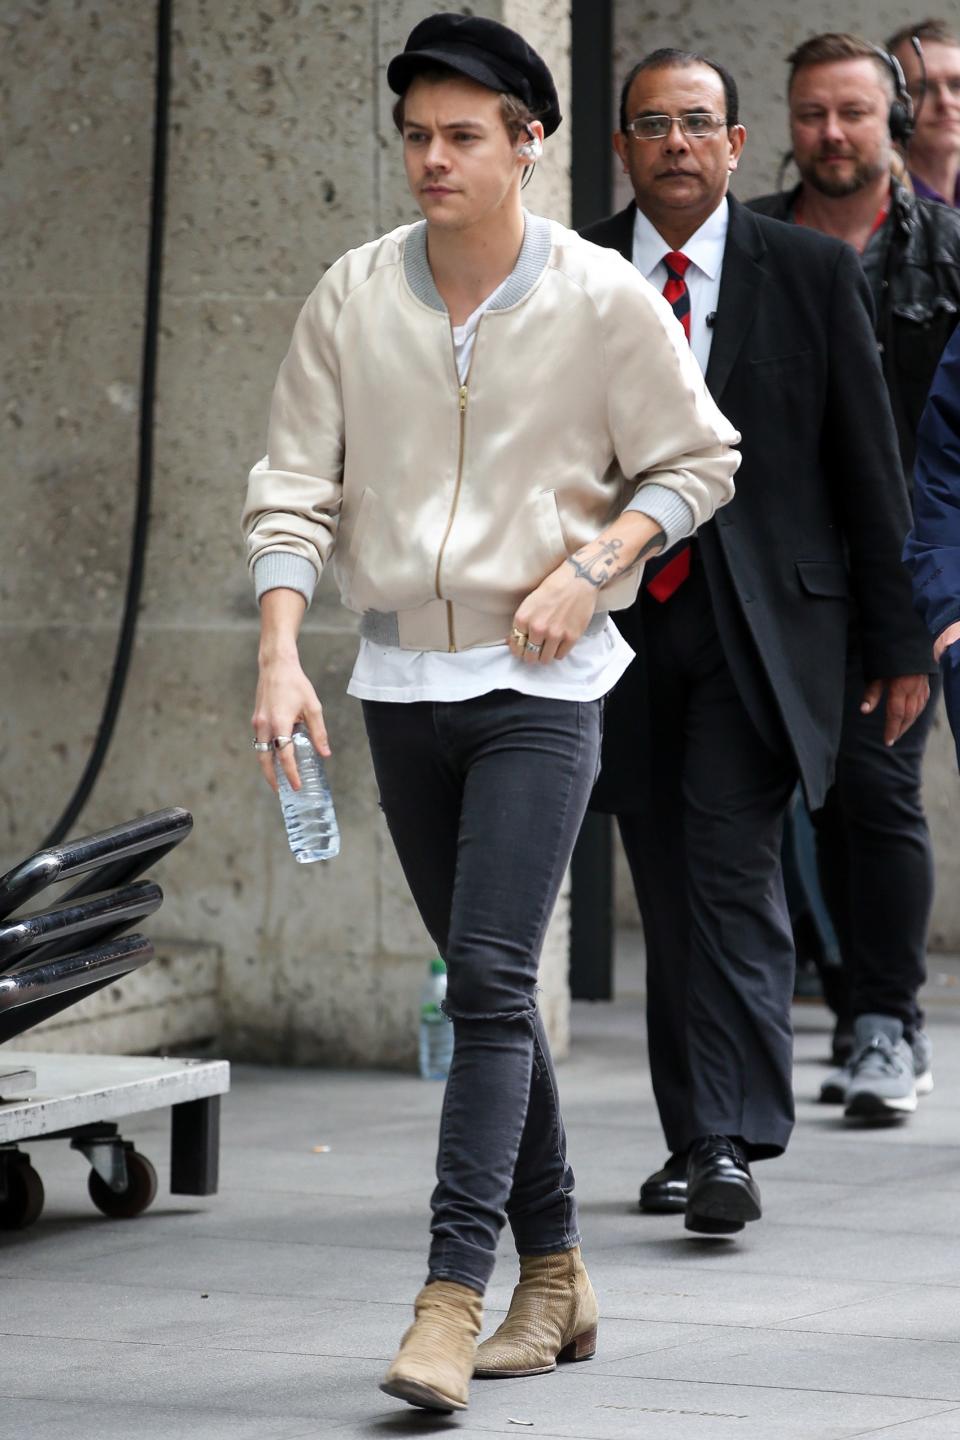 Arriving as a rehearsal for The One Show at BBC Studios in London.